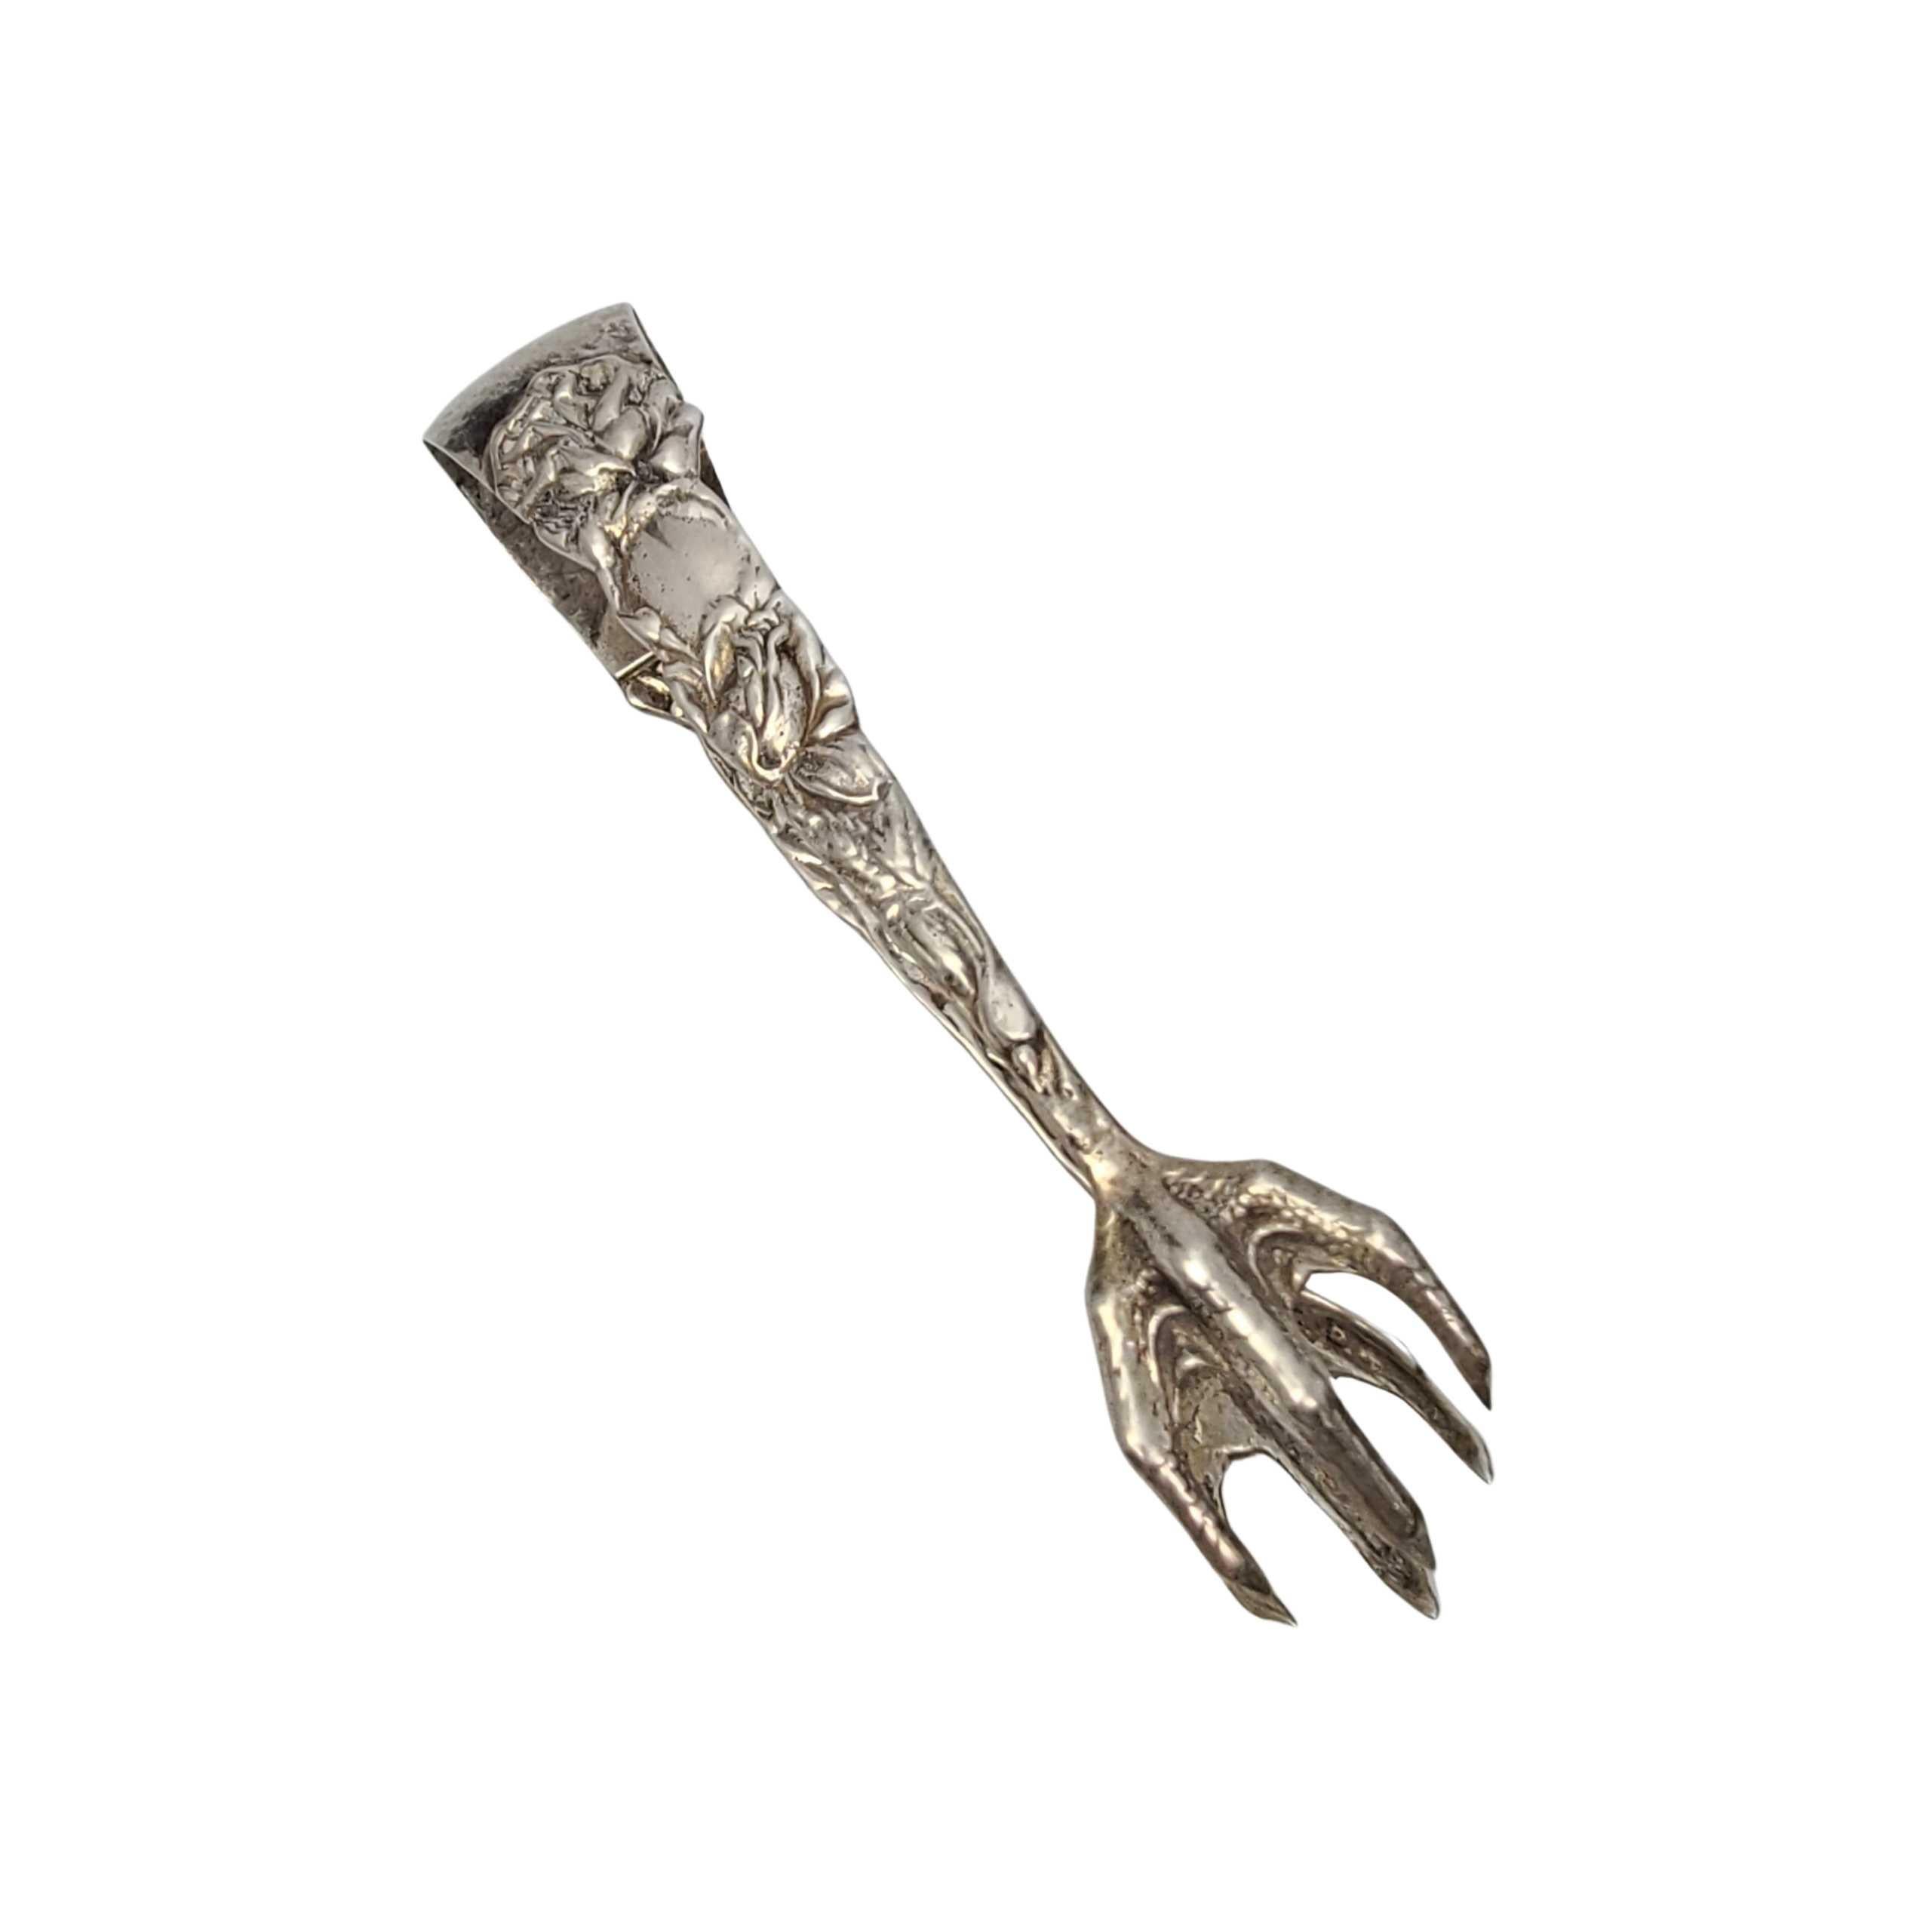 Antique sterling silver tongs.

No monogram.

Large serving tongs with art nouveau style flower design on both sides with claws.

Measures: approx 7 1/2